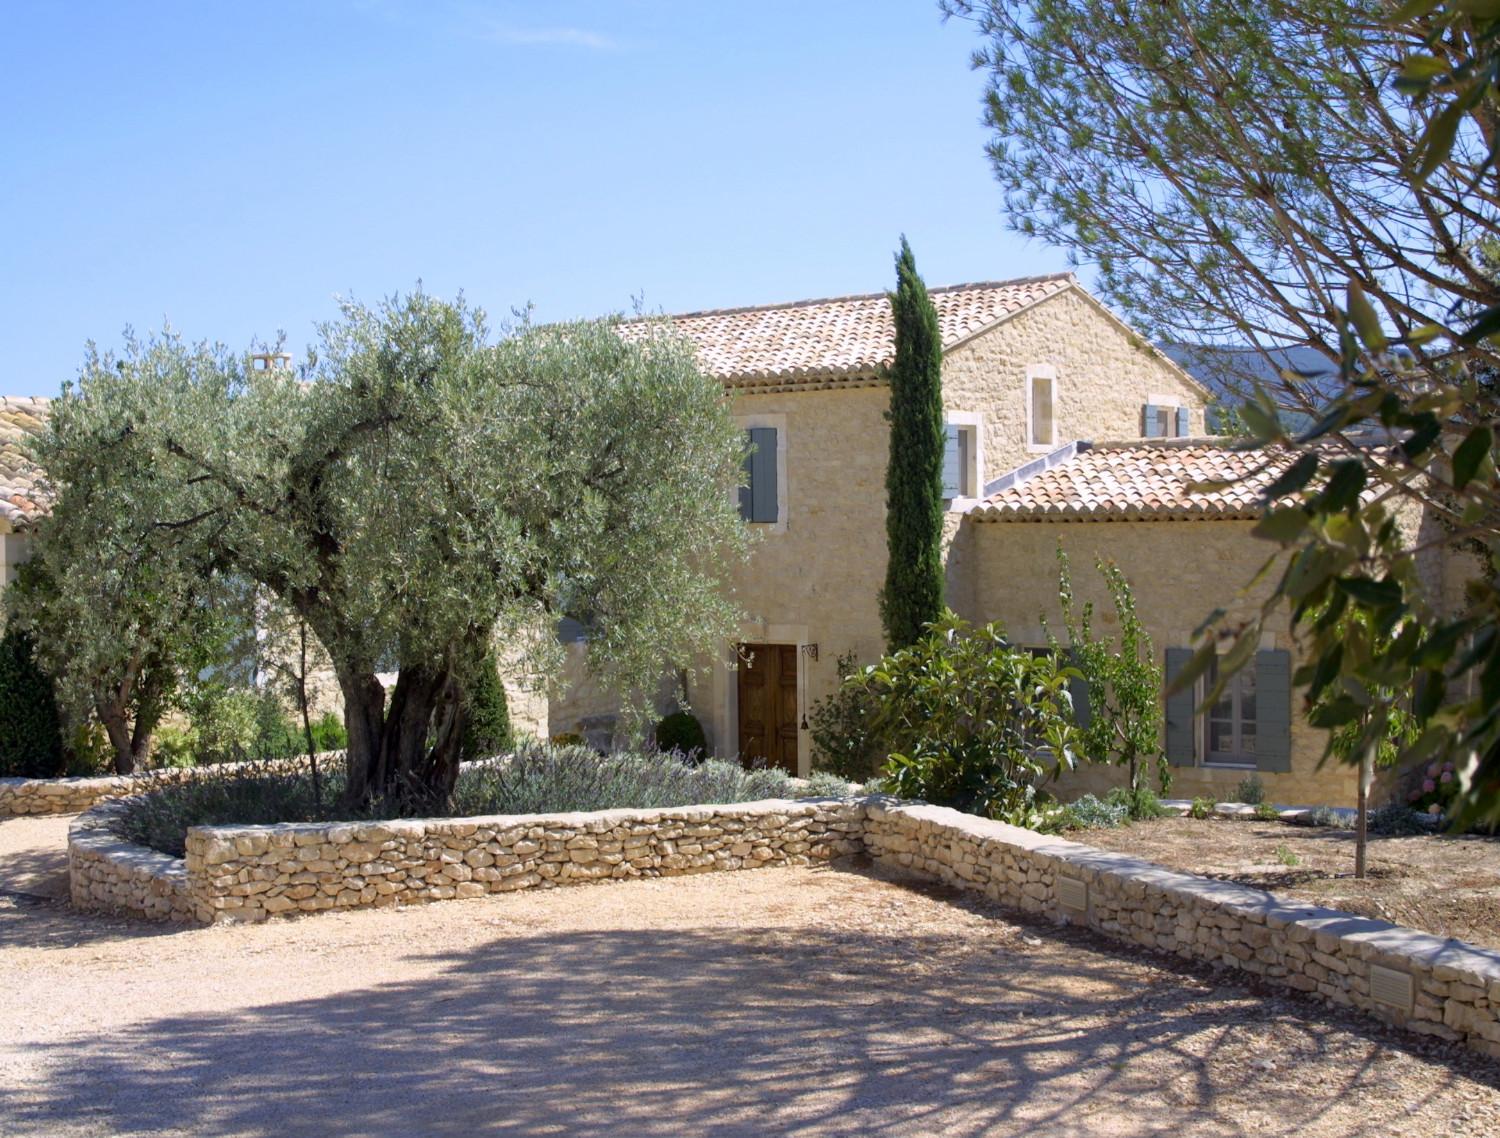 Newly built houses : A Provencal Mas made of stone - A. Nelson ...